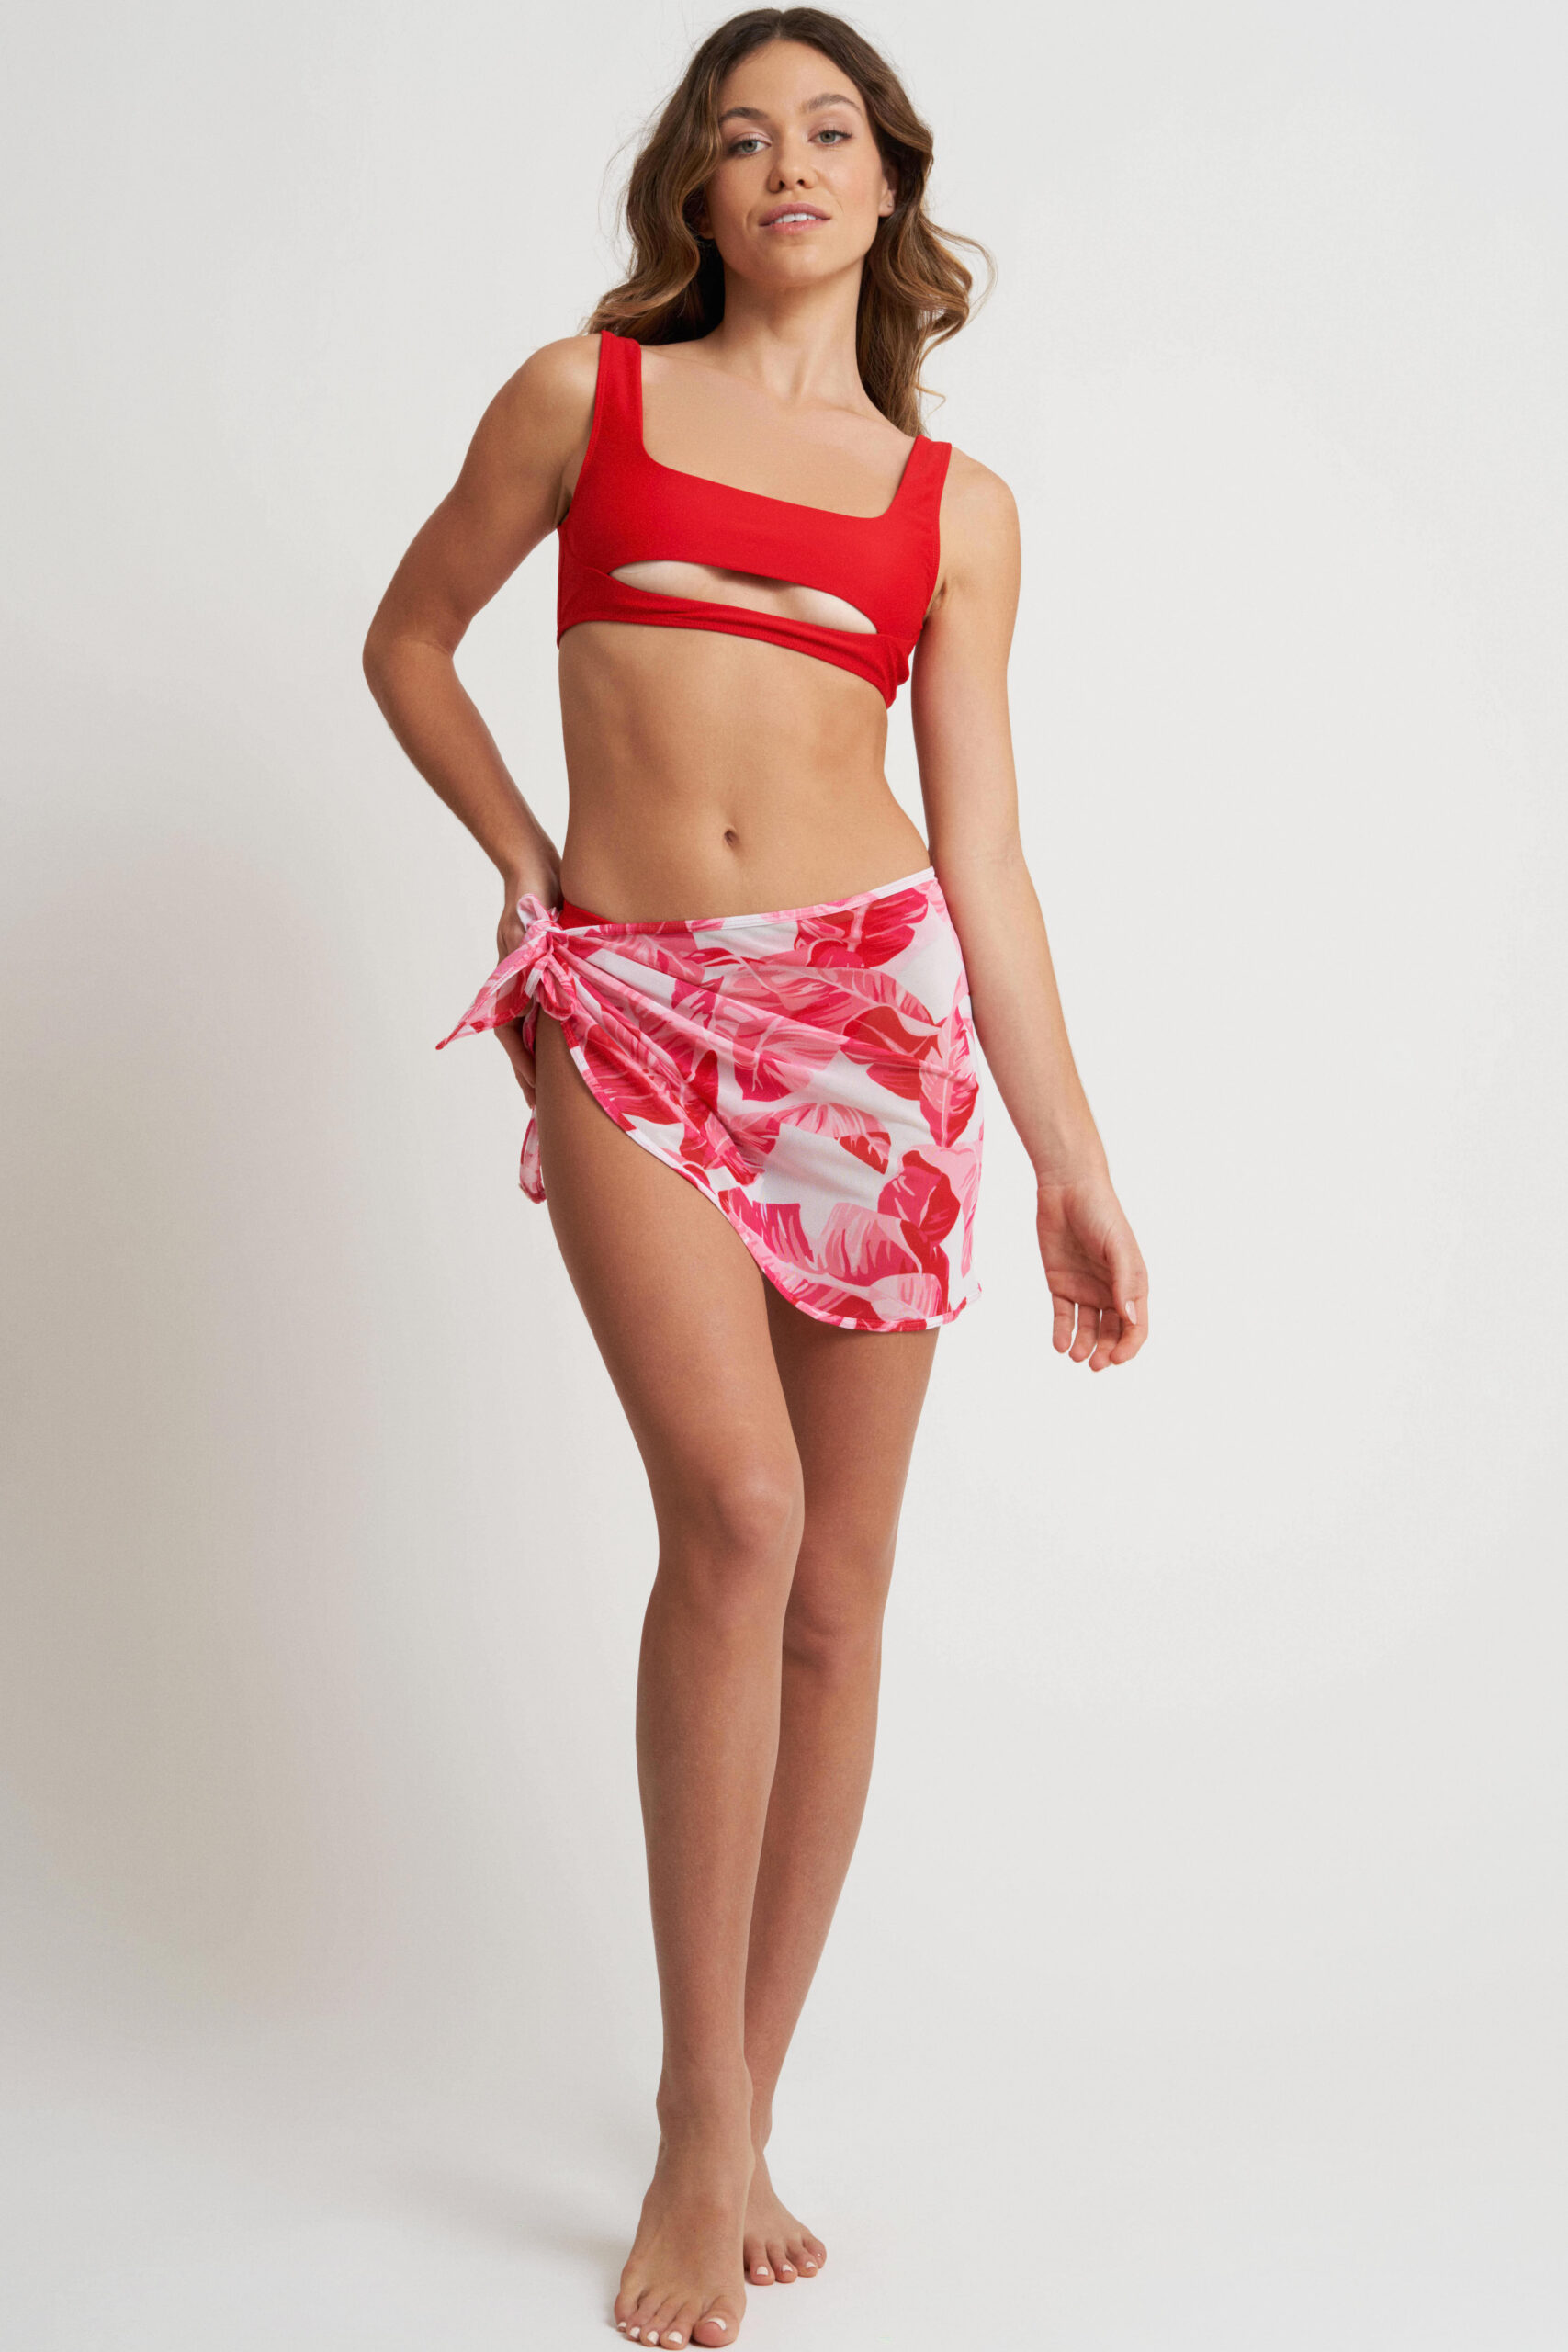 model in a red floral sarong and a red bikini top